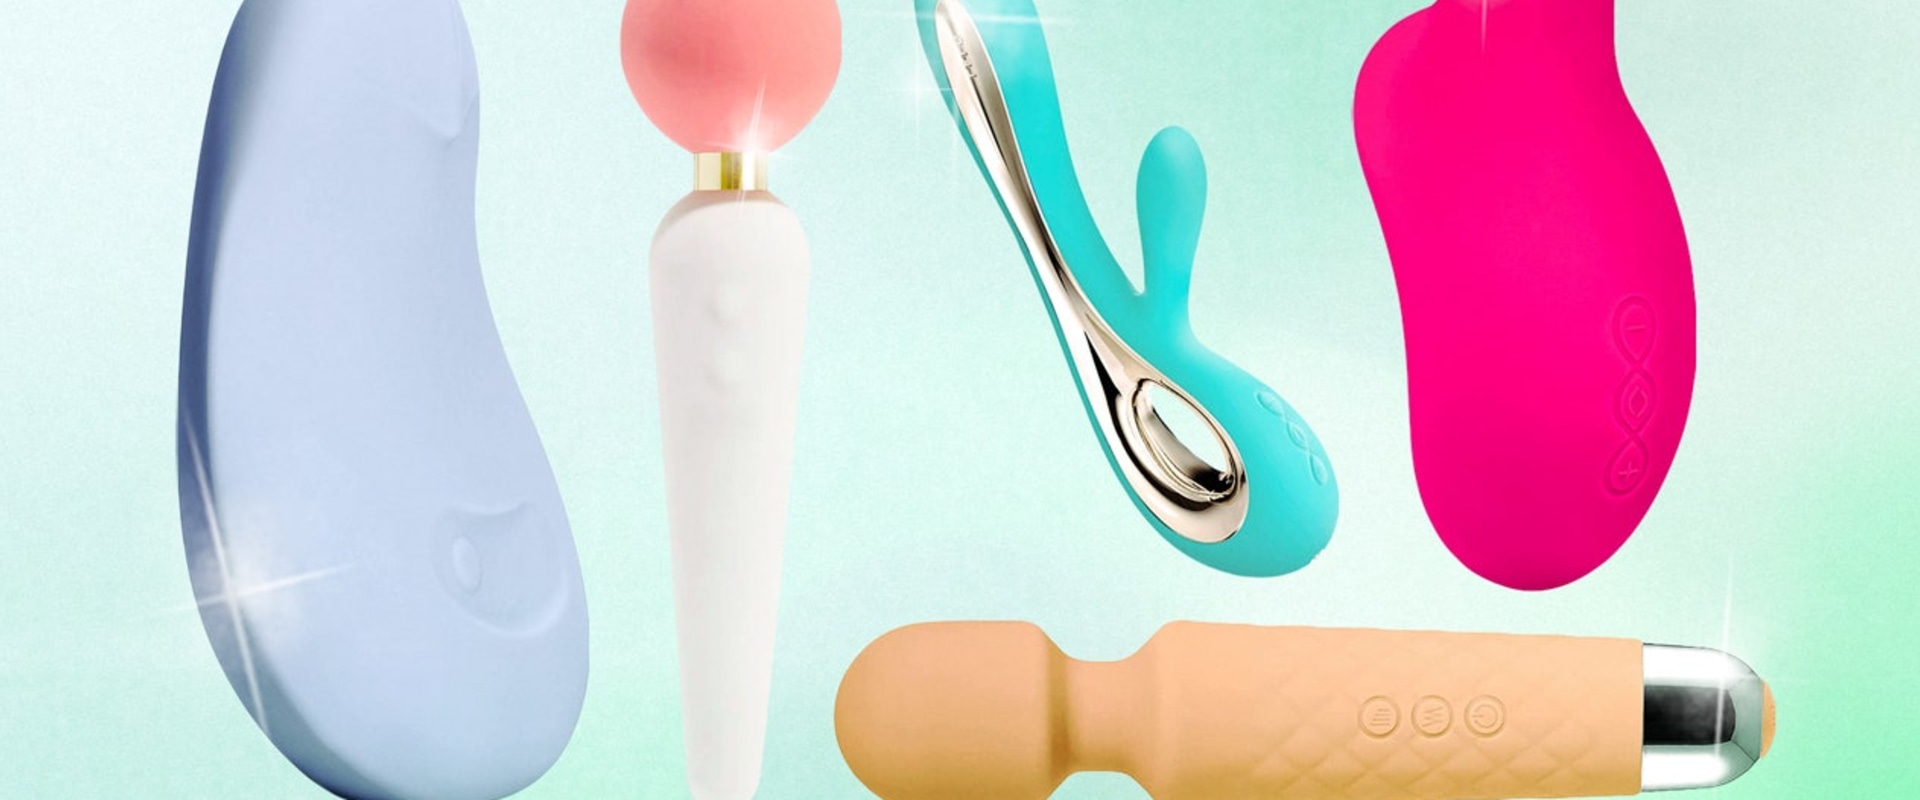 A Comprehensive Guide to Editor's Picks for the Best Vibrators